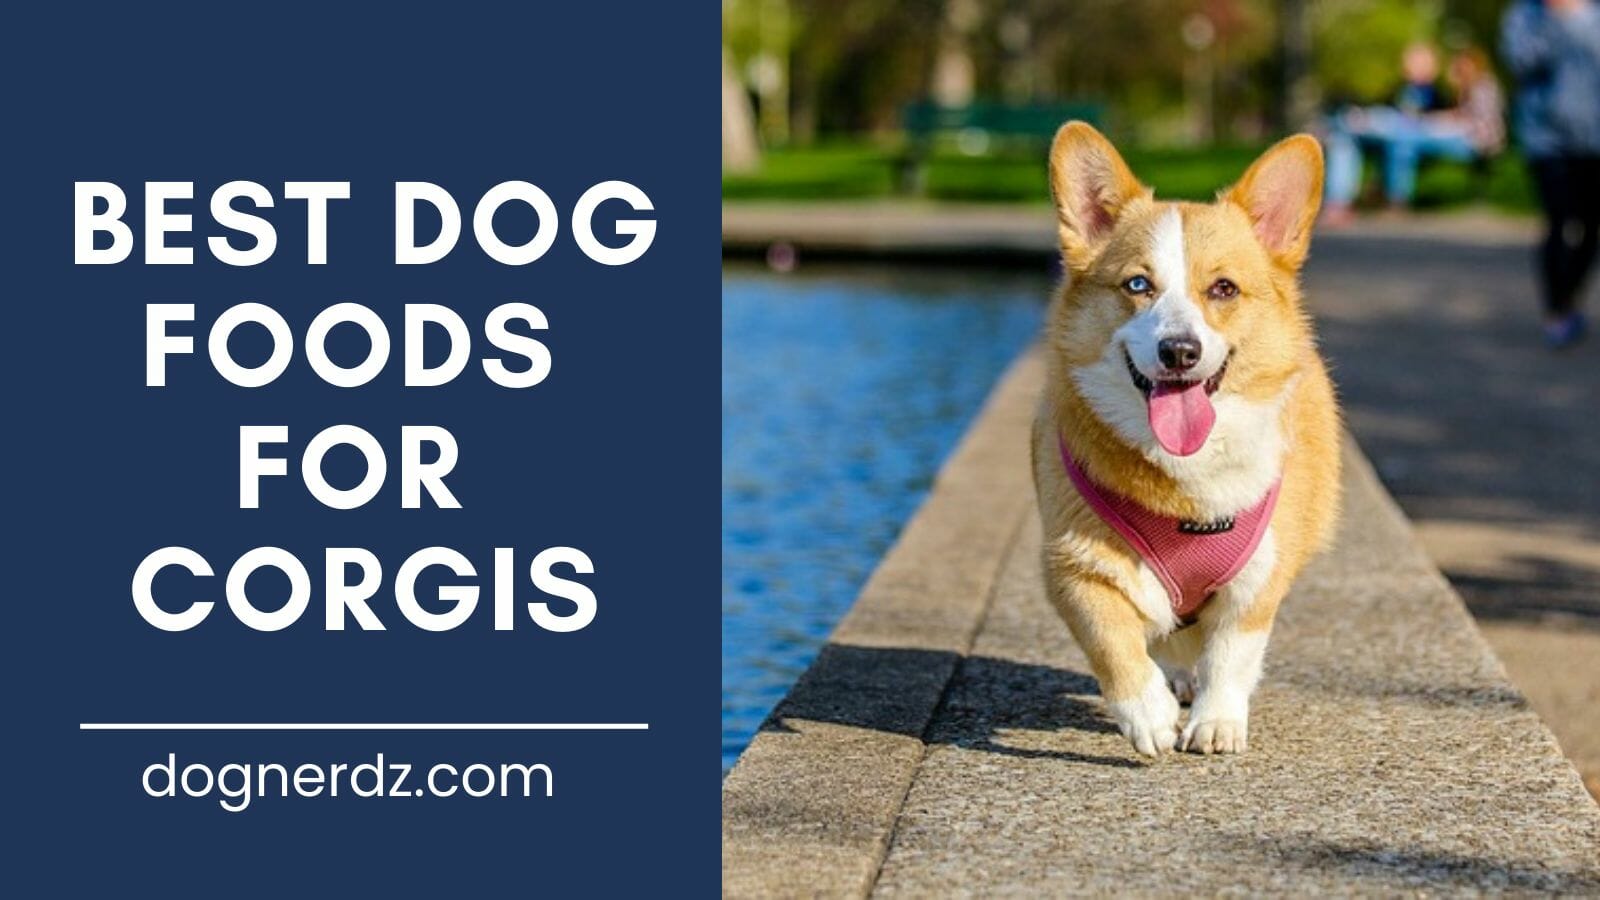 review of the best dog foods for corgis